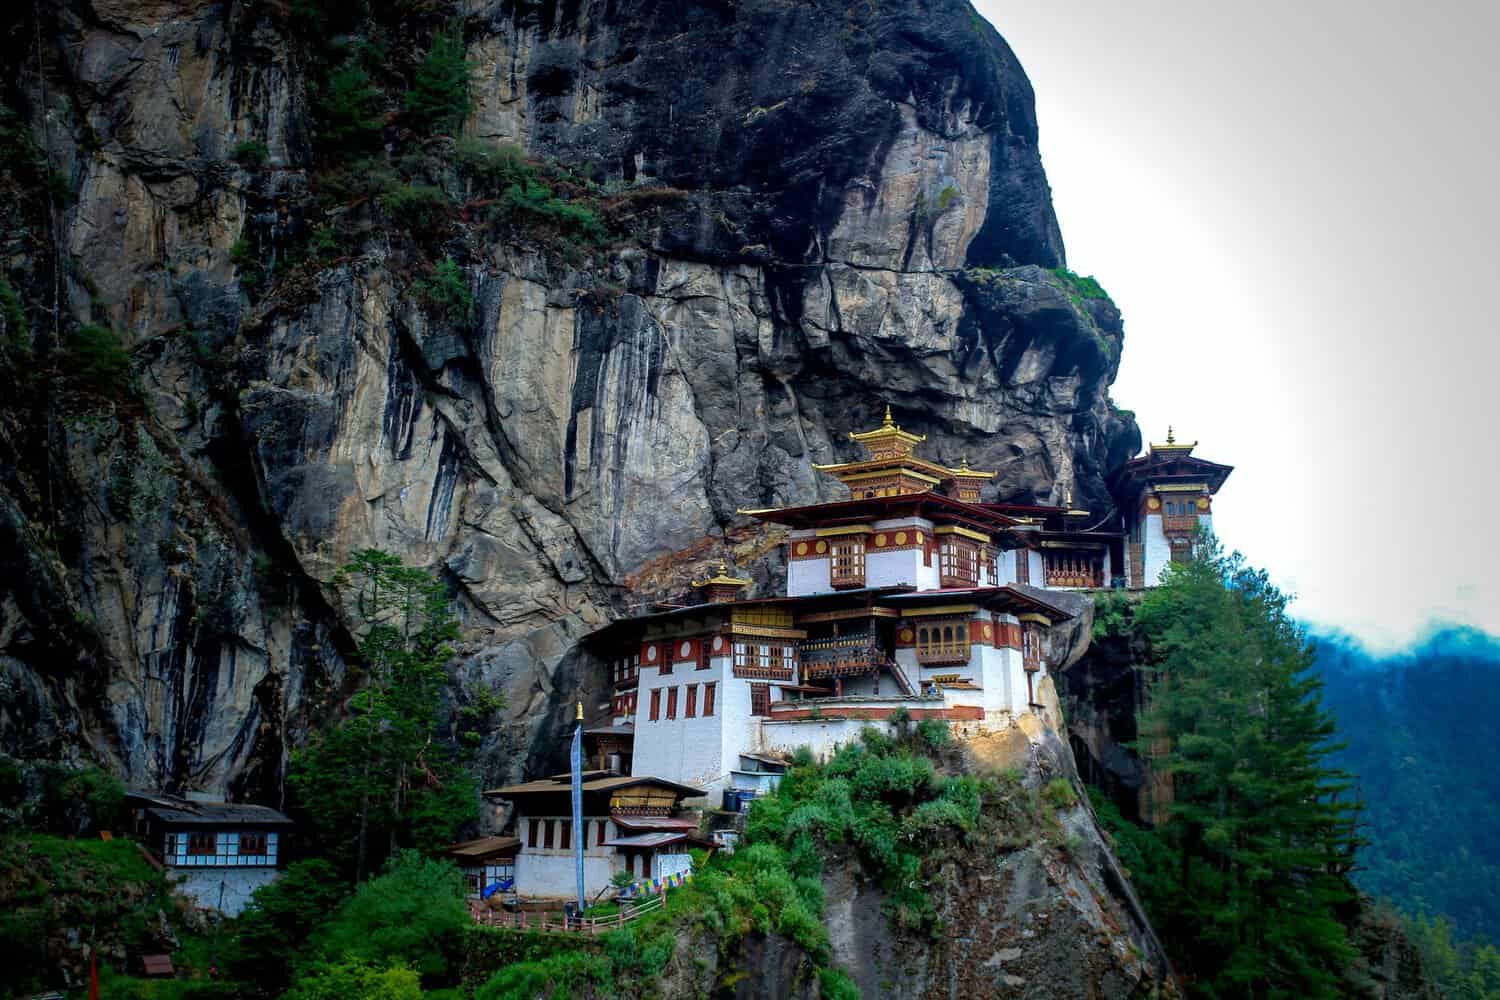 paro taktsang in bhutan a mountian top monestry nestled into the cliffs of a jaw dropping mountain range